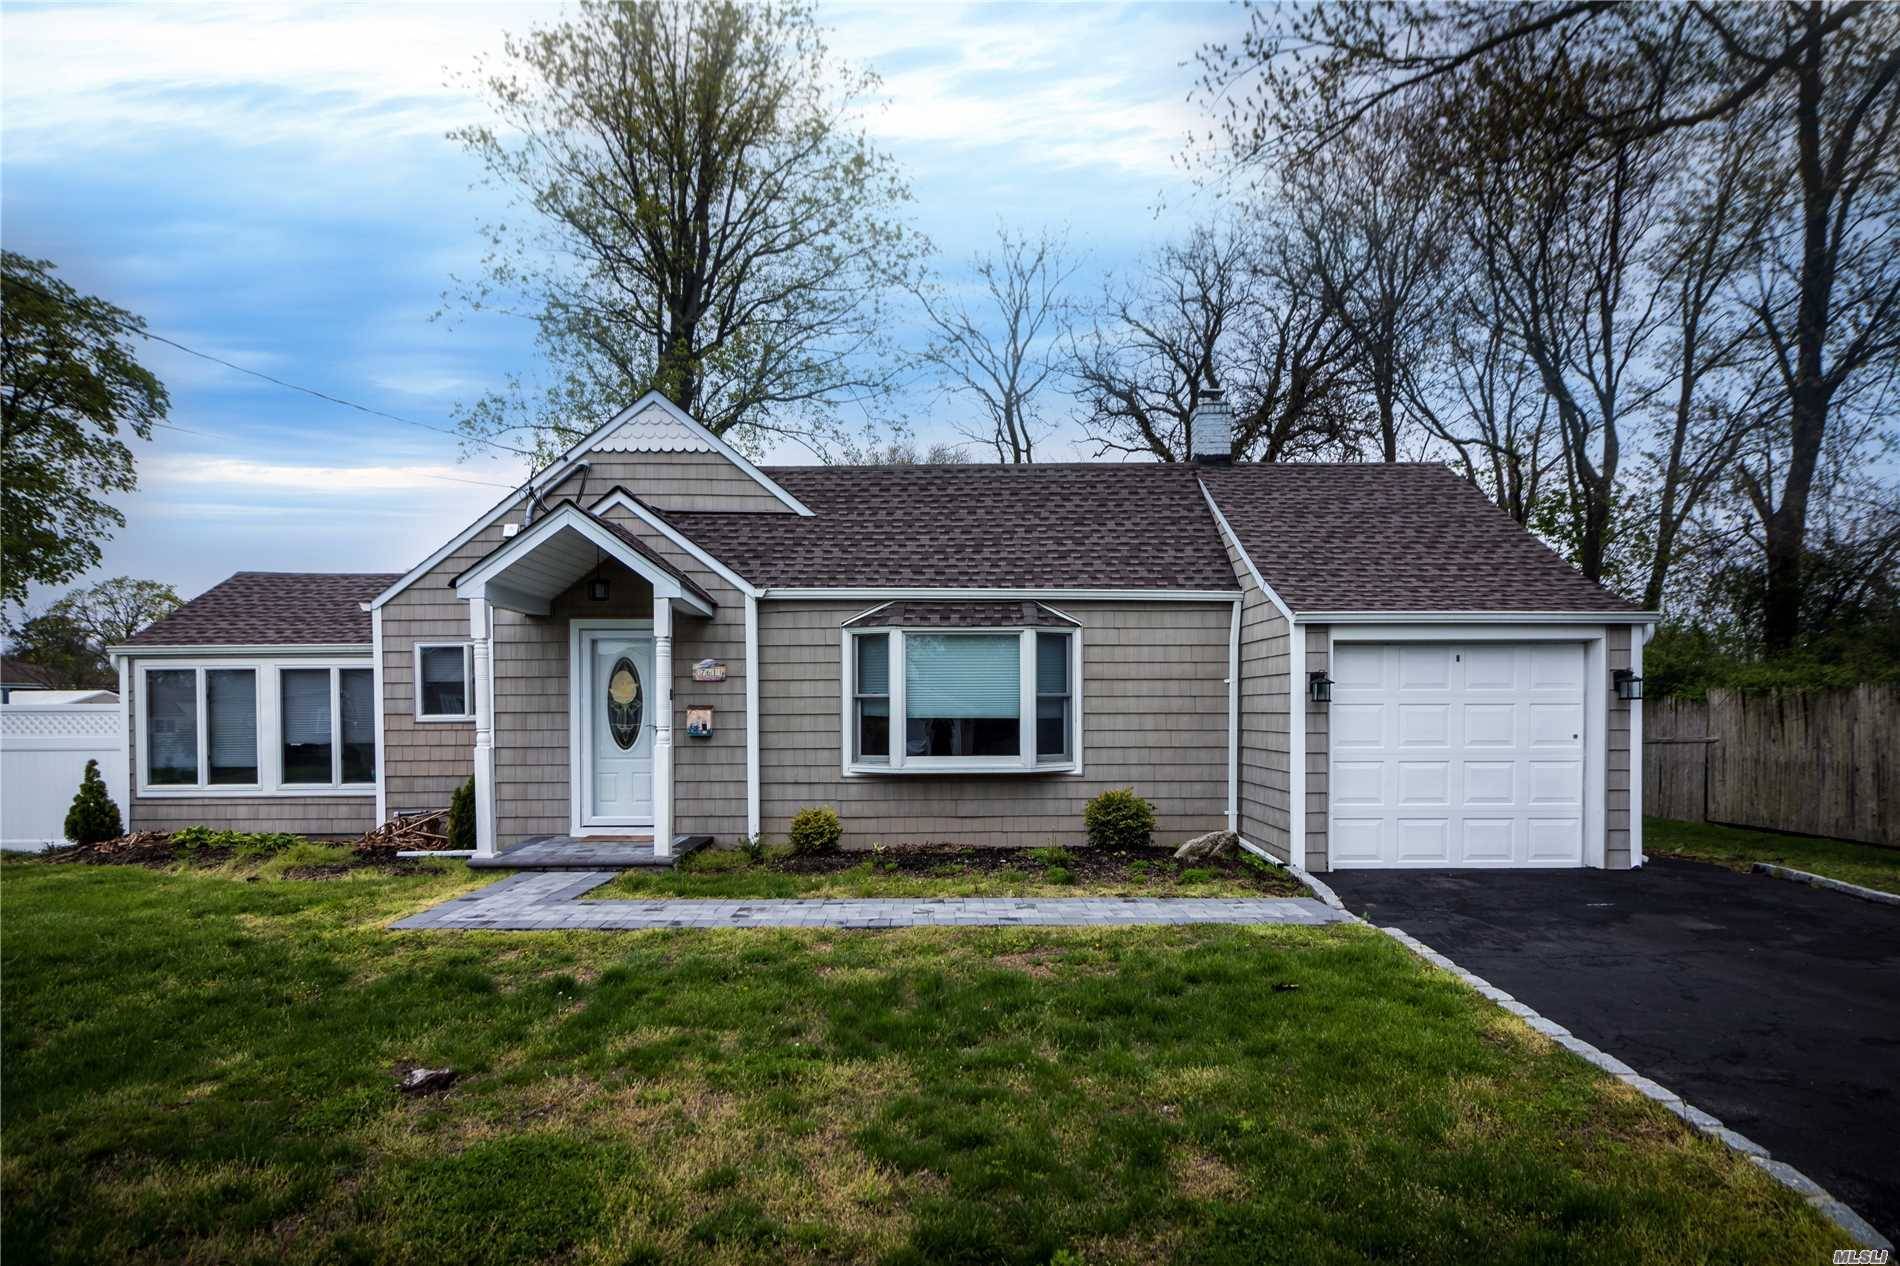 OPEN CONCEPT FLOOR PLAN This South Of Montauk Expanded Ranch Has Been Renovated W New Kitchen W Granite SS Appliances, Living Room W Fireplace, Dining Room, Den, Mstr Suite W ...